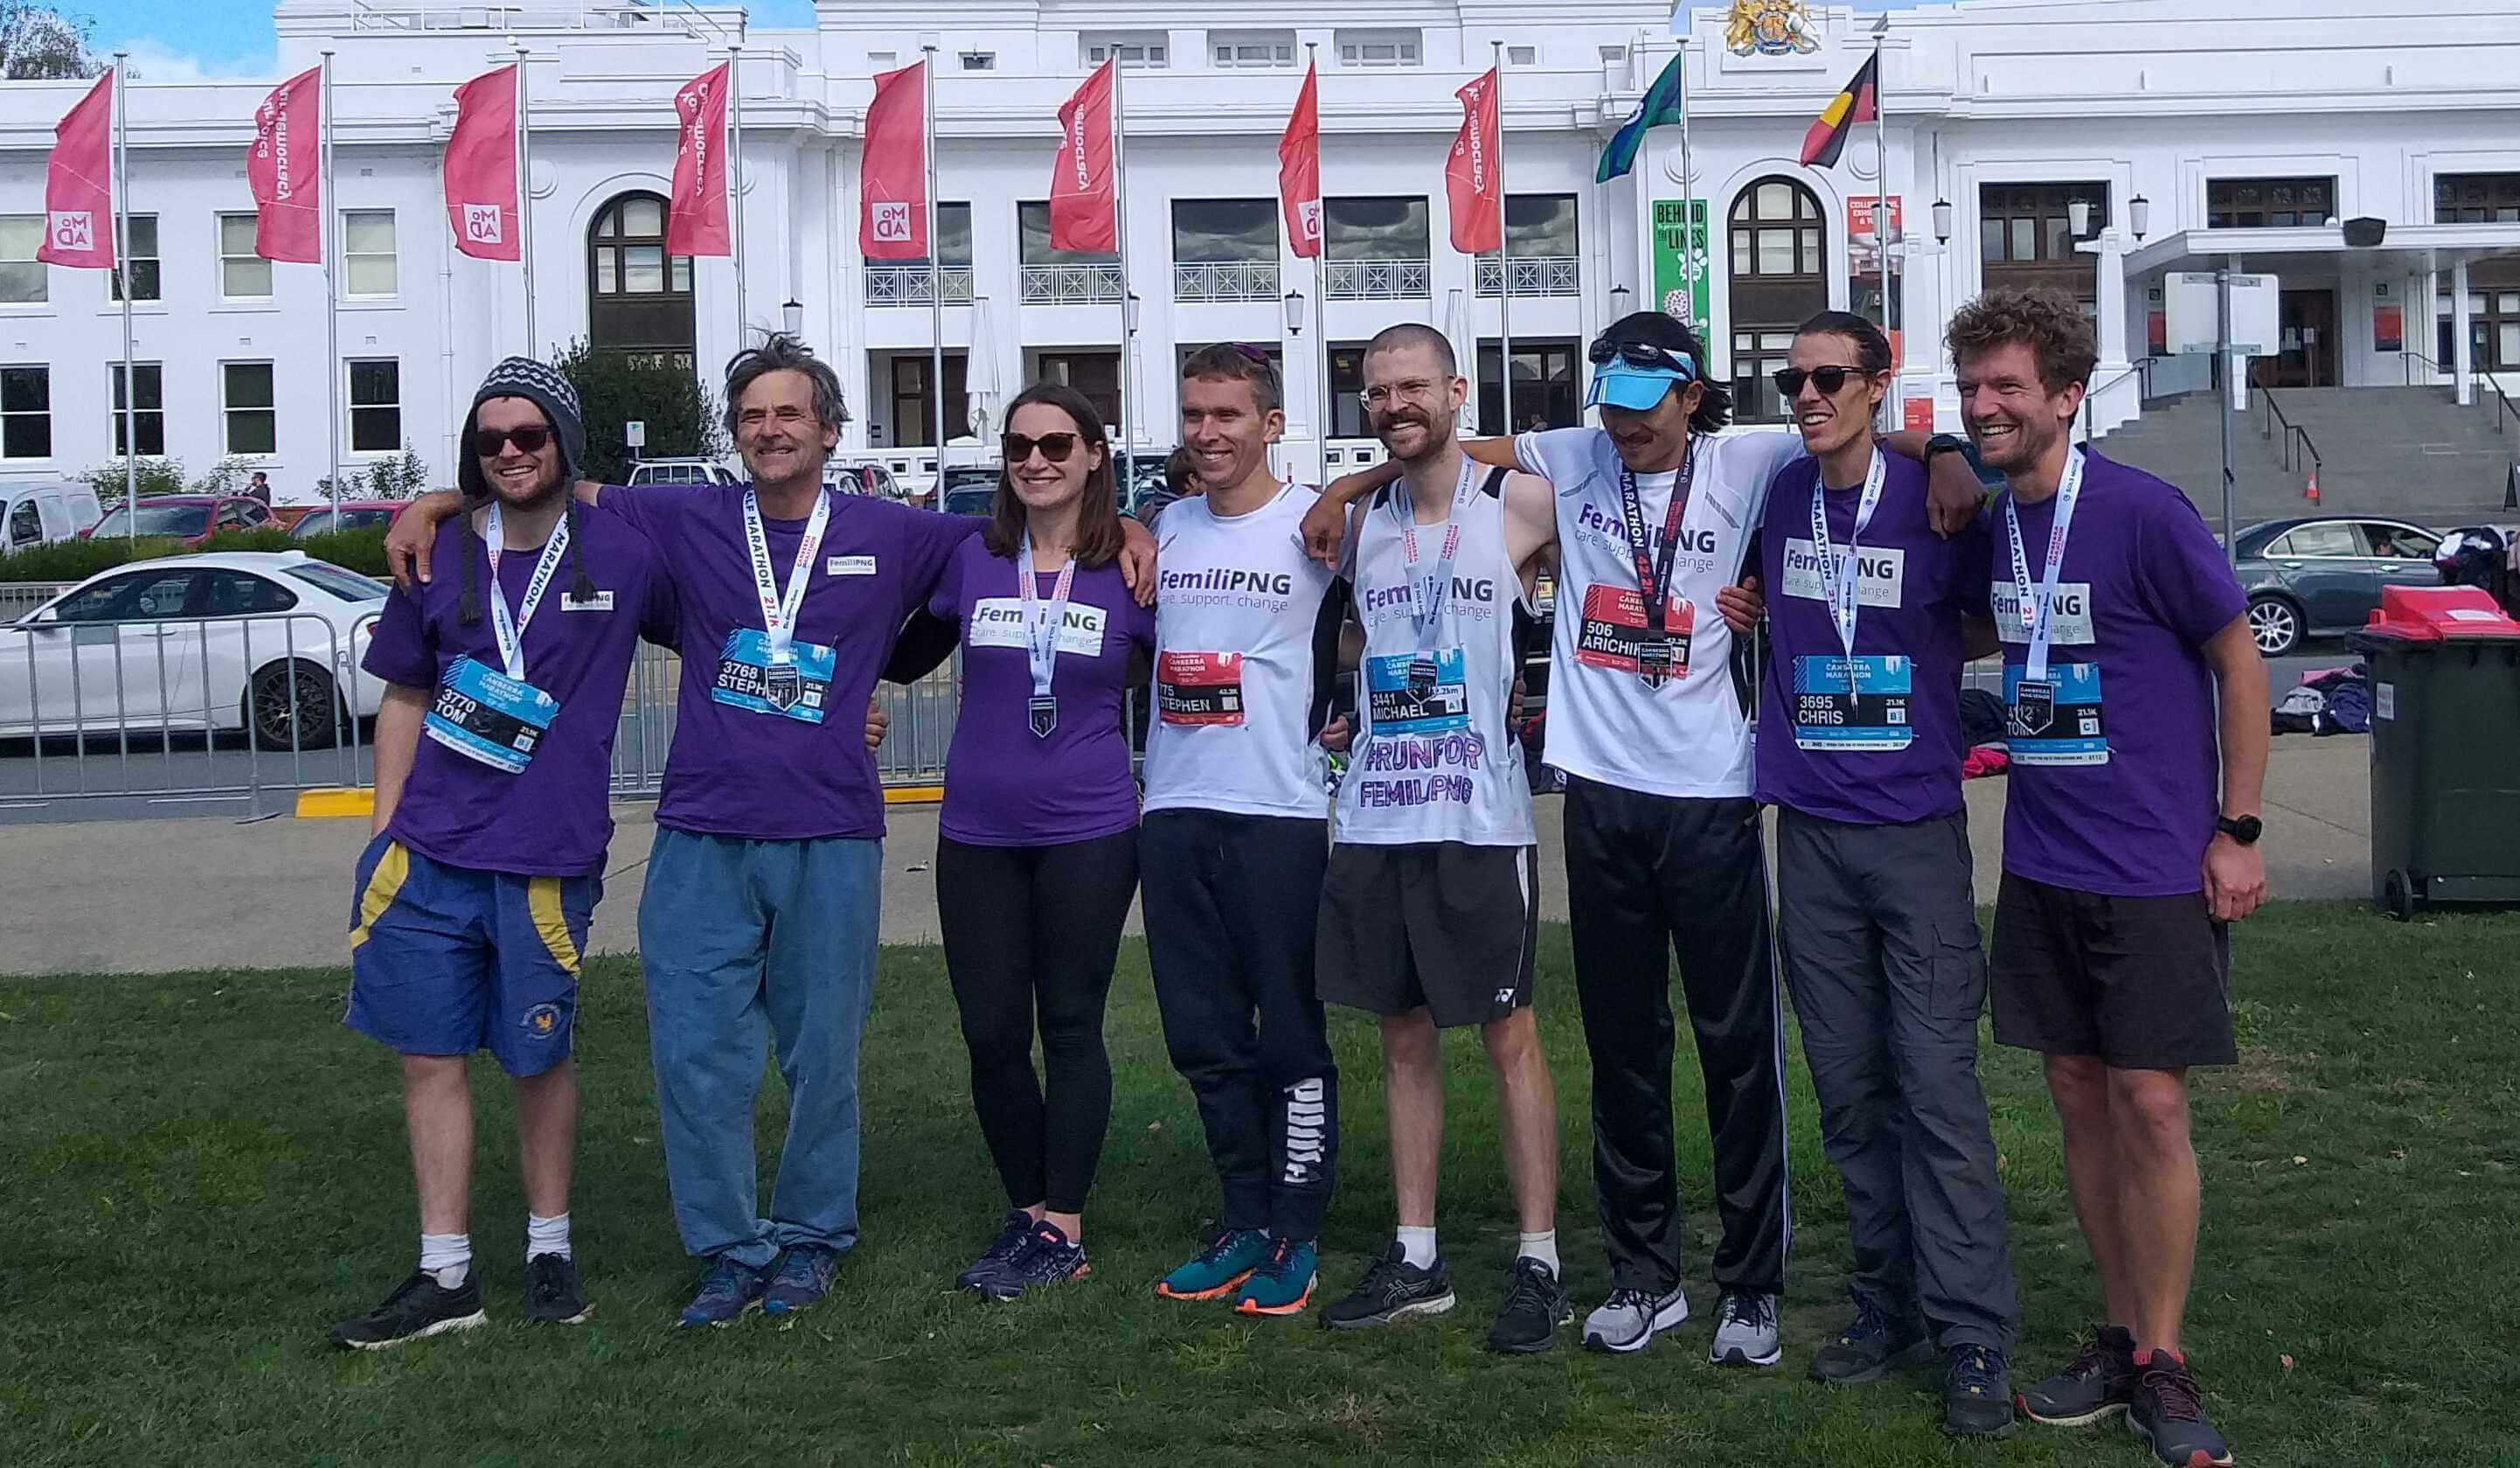 Tom with the FemiliPNG team in front of Old Parliament House, Canberra after completing his half marathon at The Canberra Times Marathon Festival